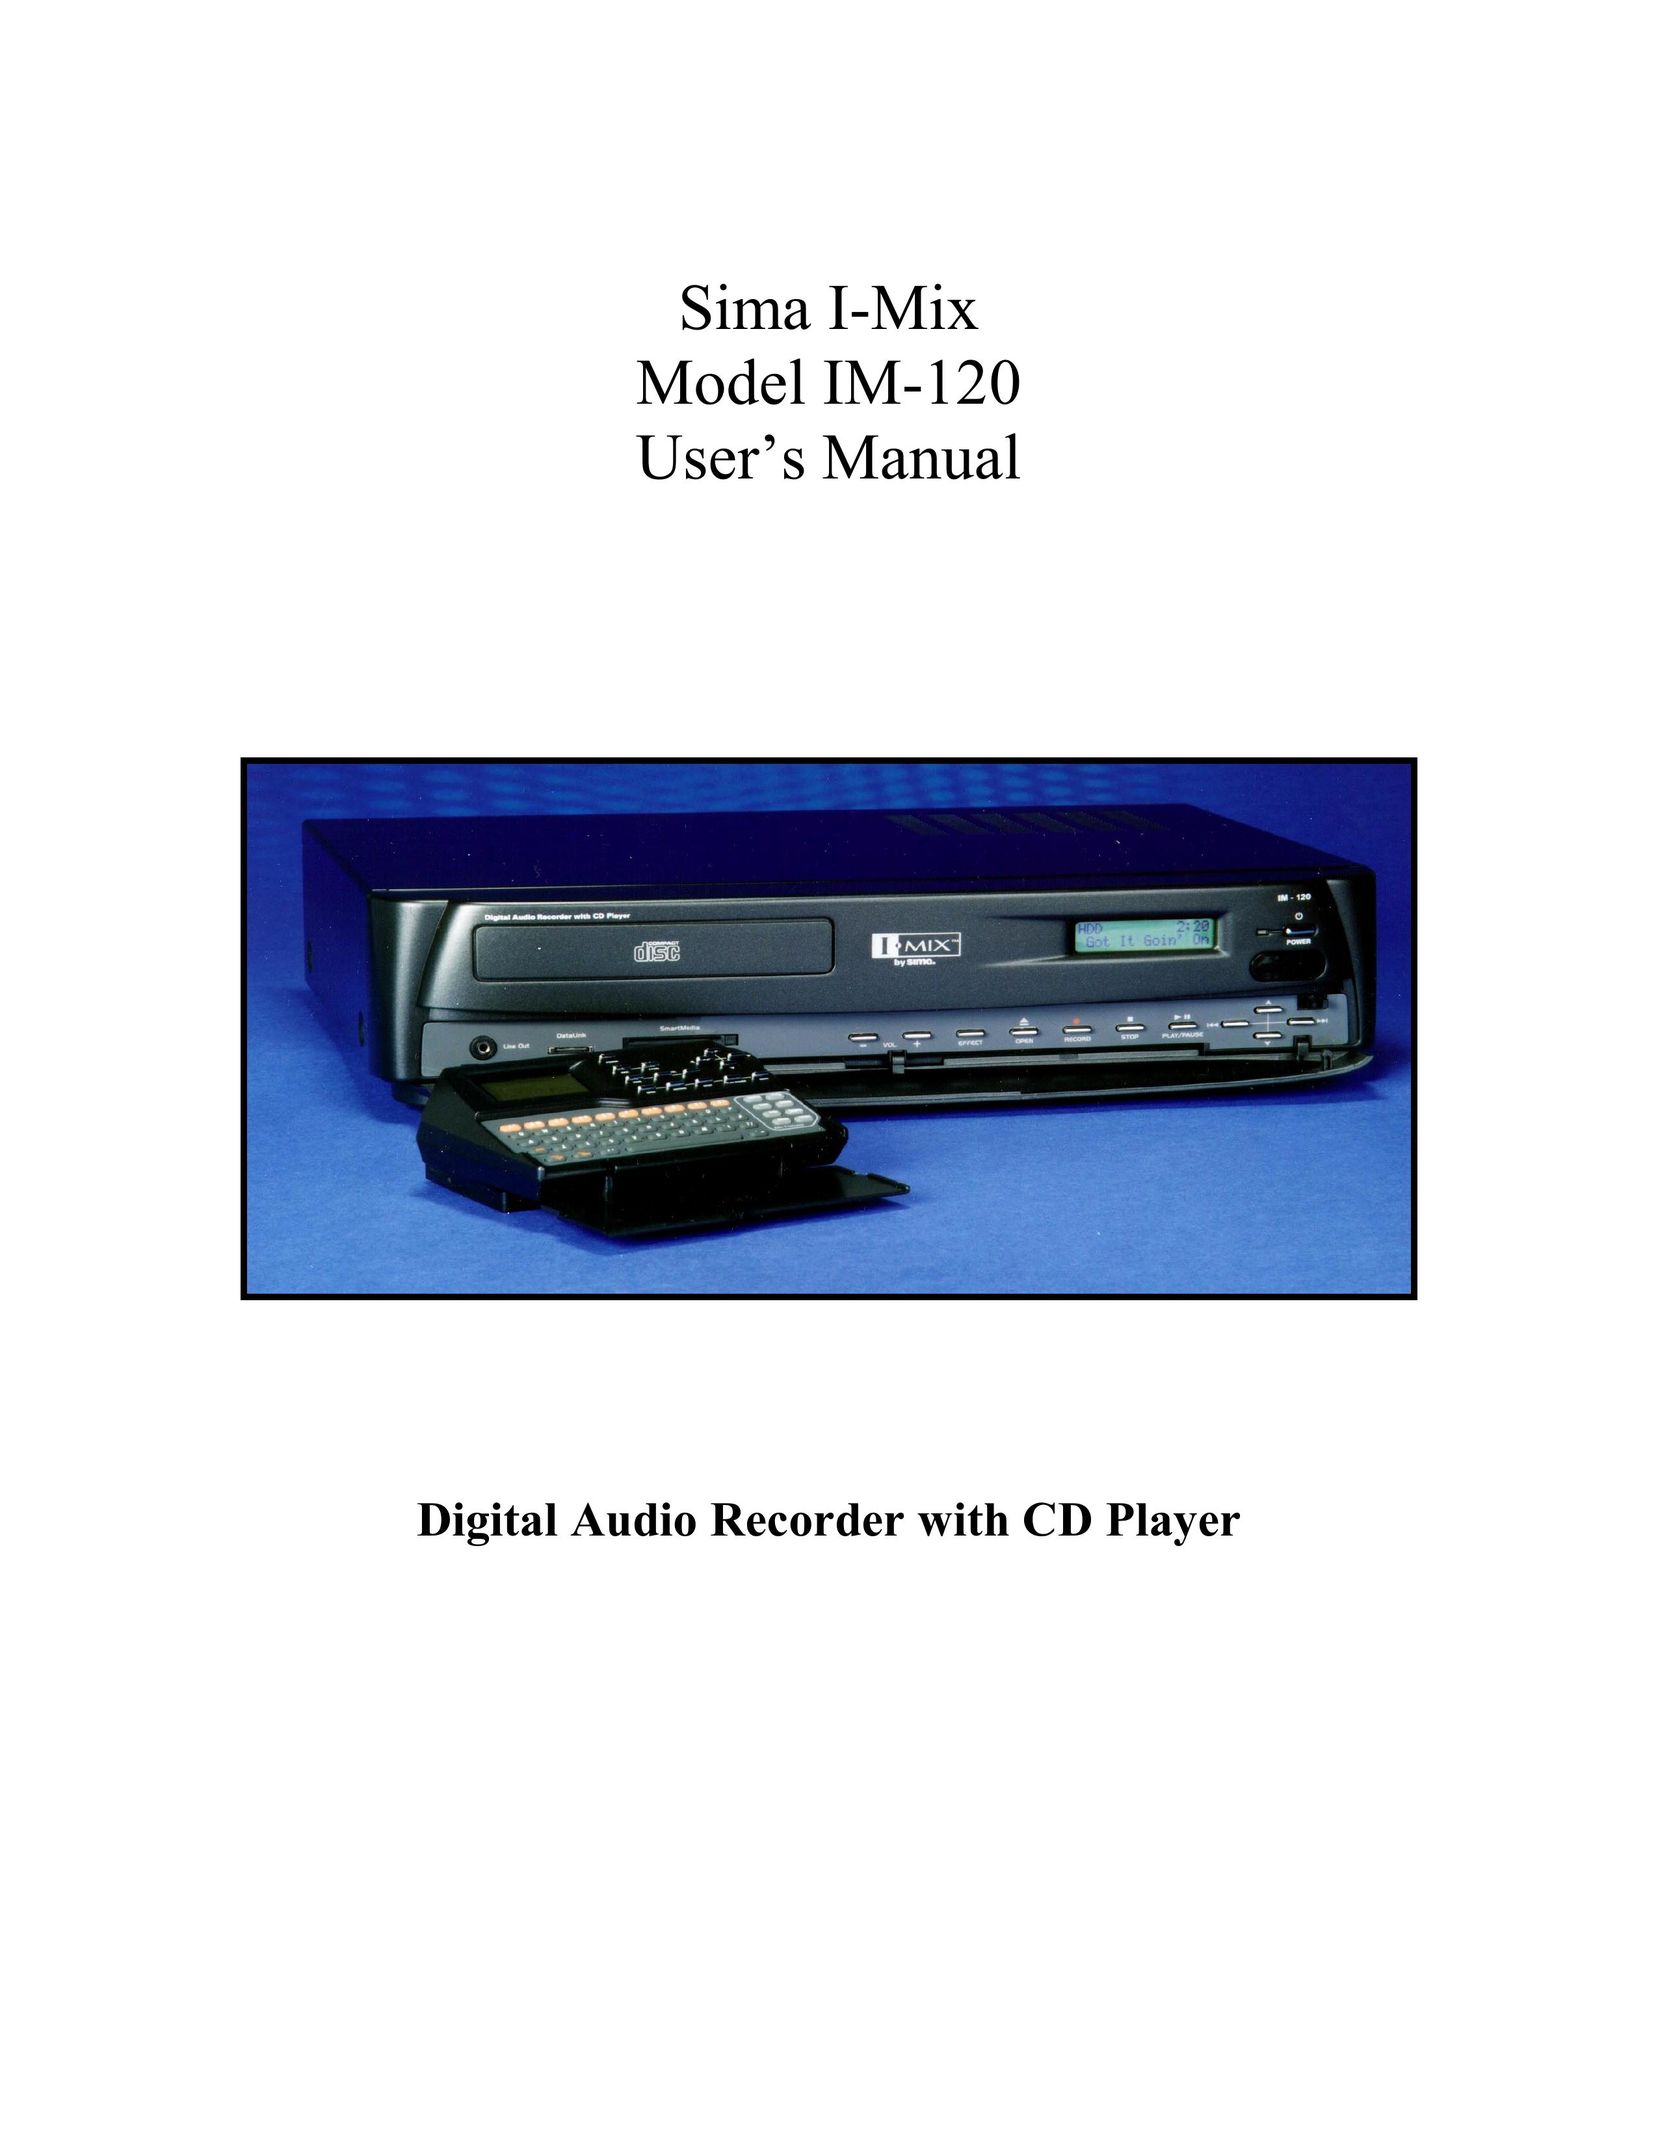 Sima Products 120 MP3 Player User Manual